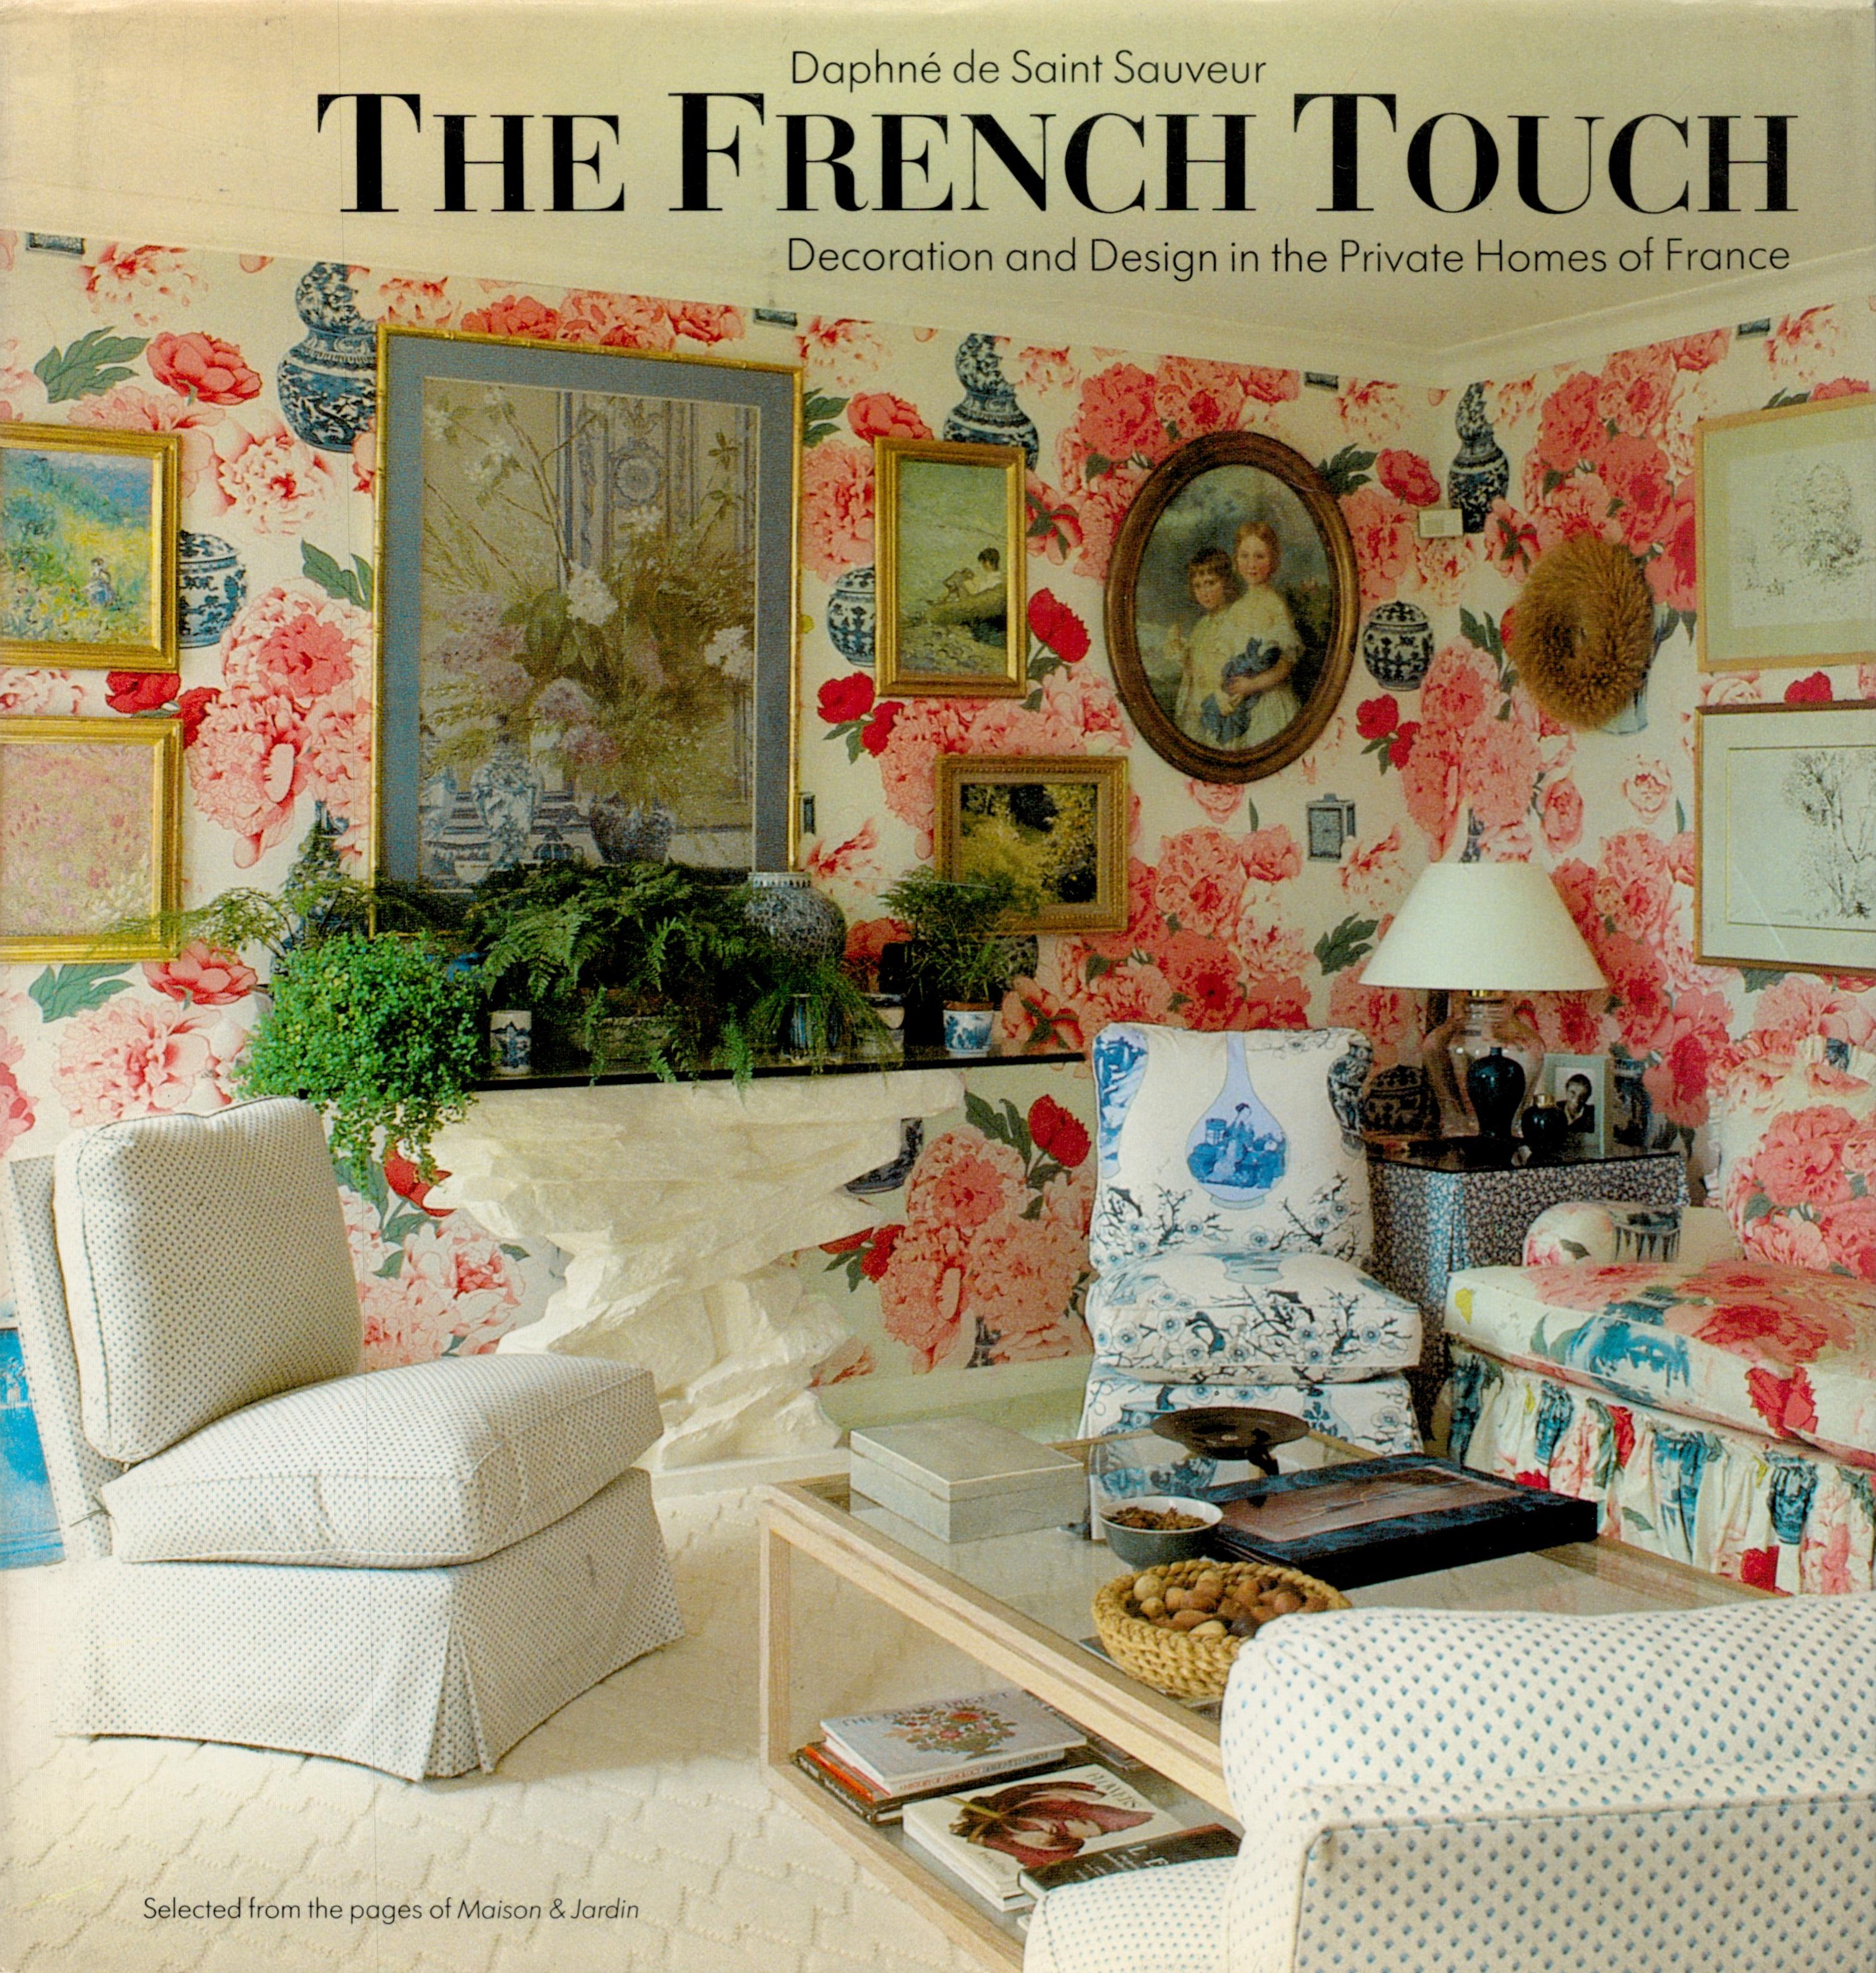 The French Touch Decoration and Design in The Private Homes of France by Daphne de Saint Sauveur